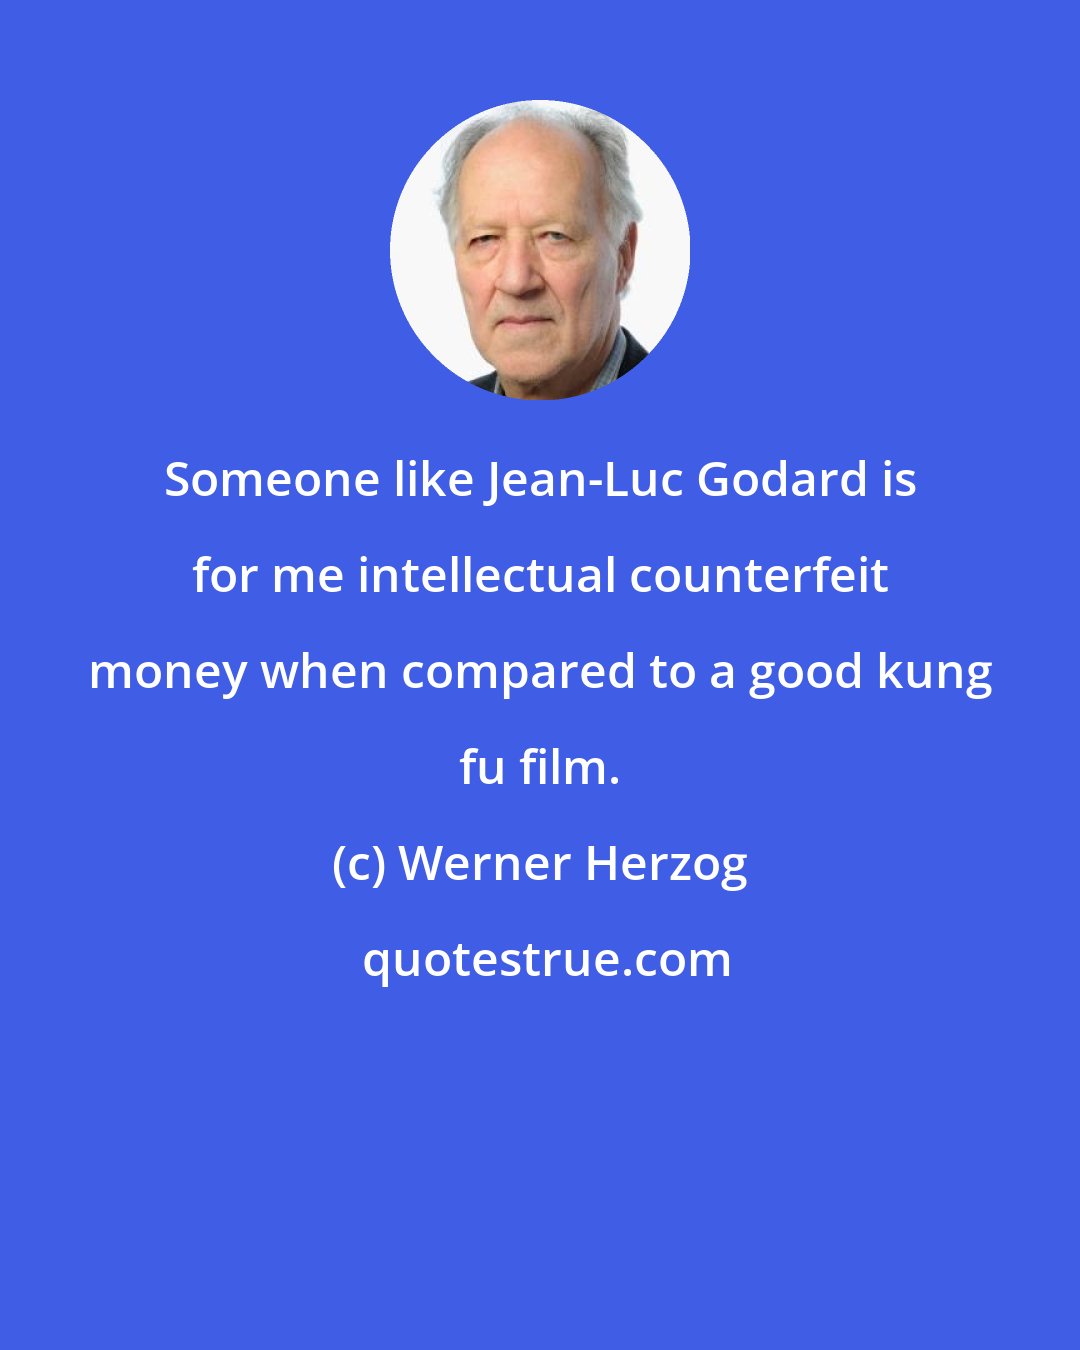 Werner Herzog: Someone like Jean-Luc Godard is for me intellectual counterfeit money when compared to a good kung fu film.